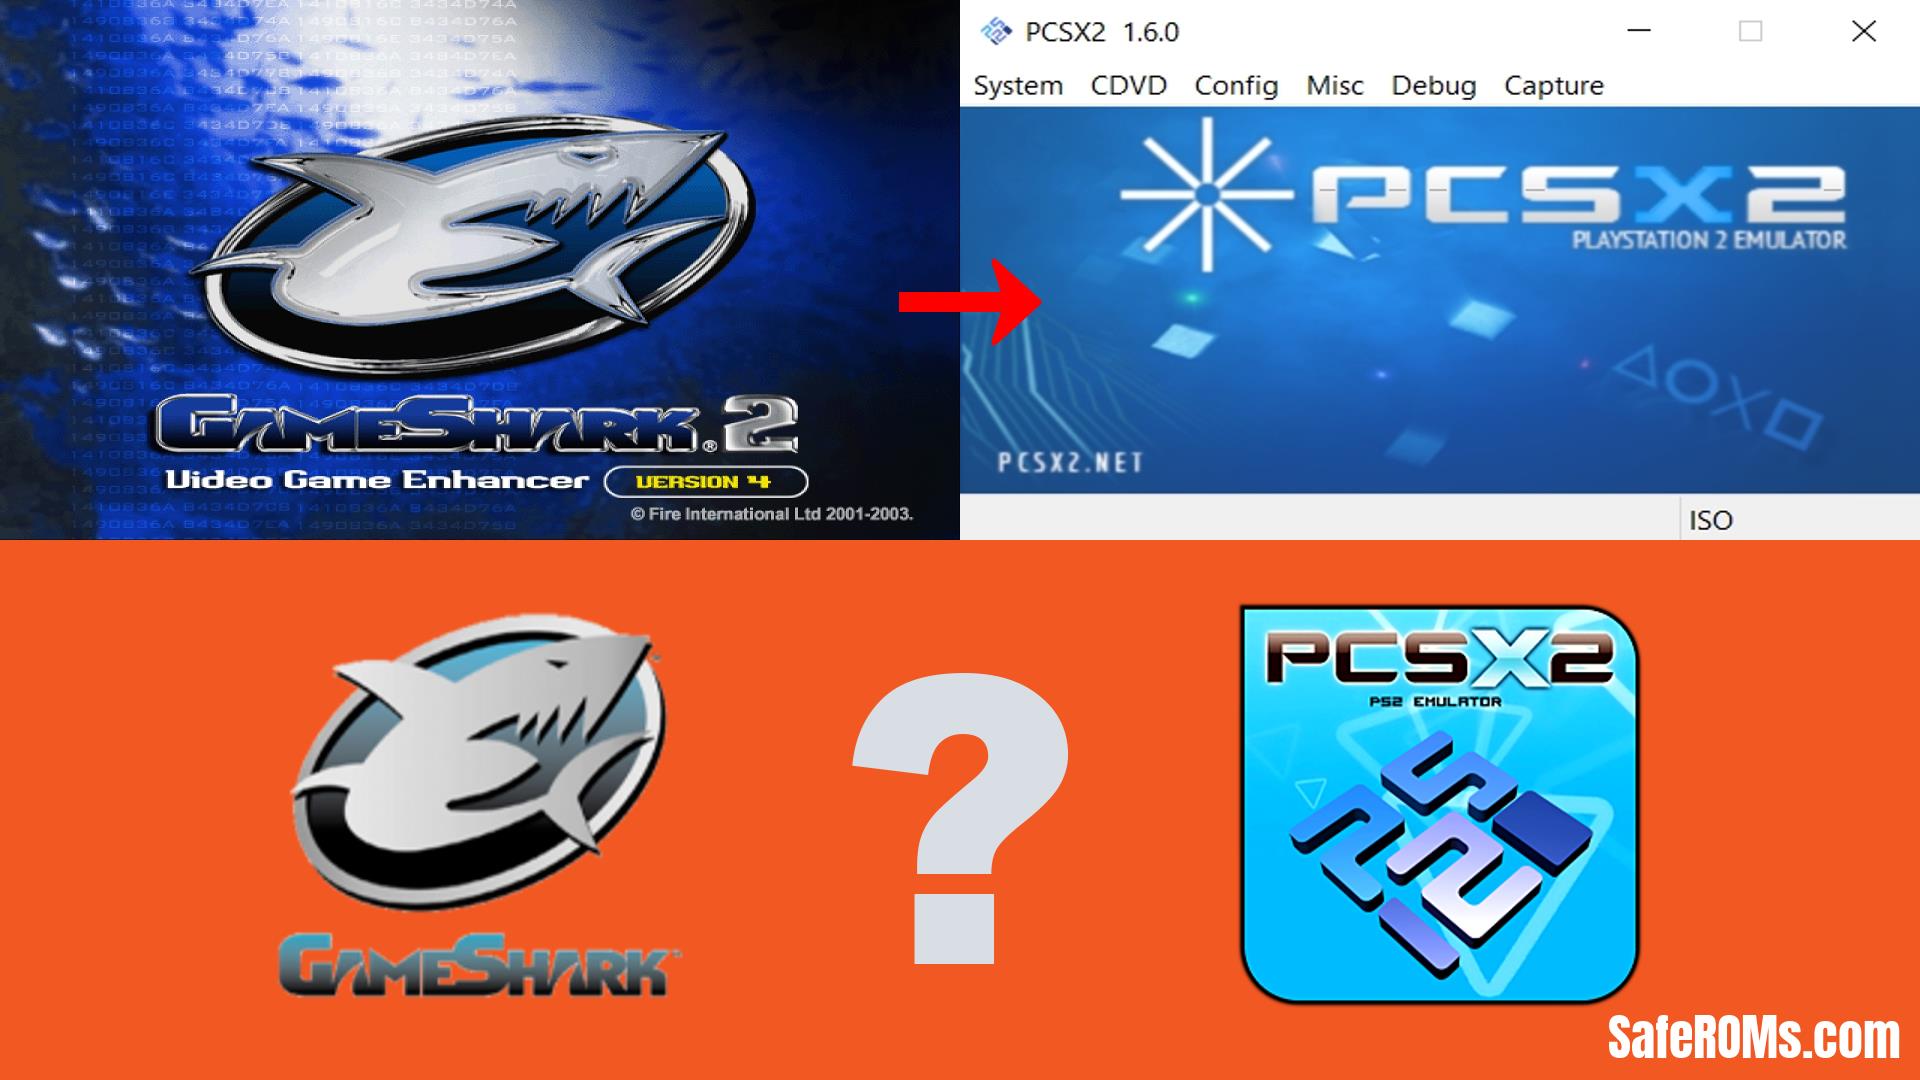 How To Use Gameshark On Pcsx2 2021 Saferoms